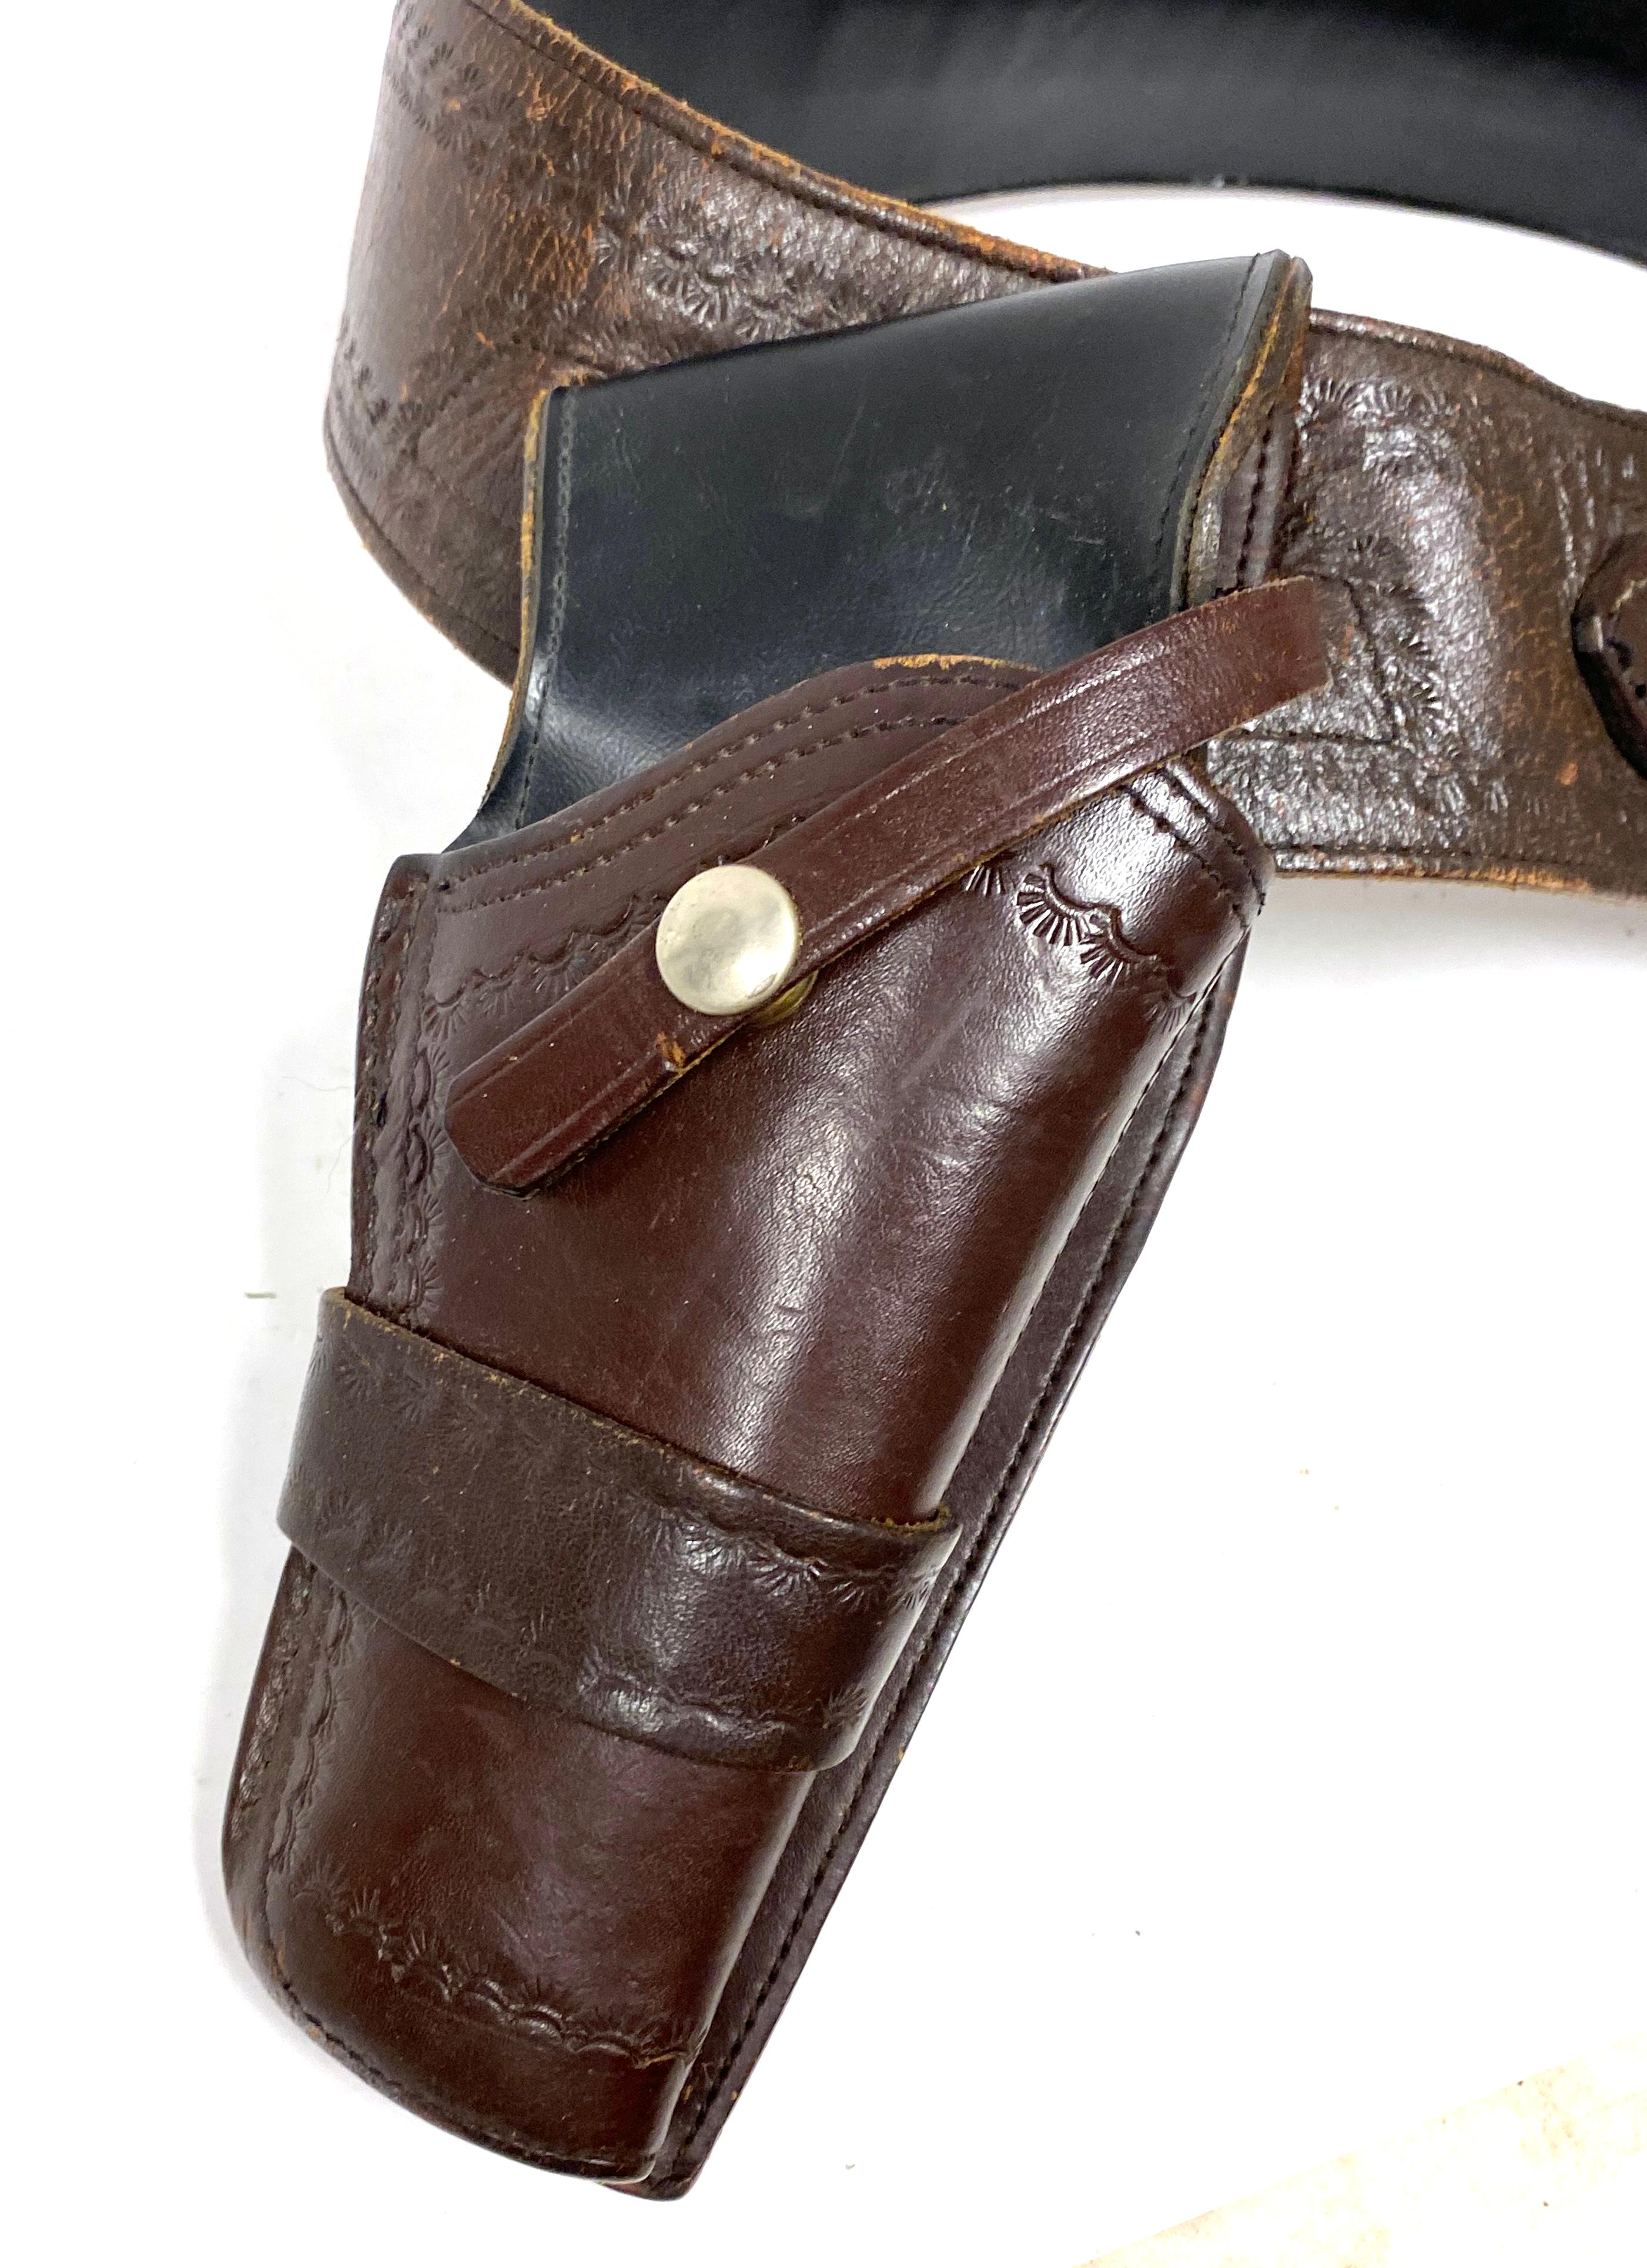 Nice Thick Padded Tooled Western Style Holster & Belt Cowboy Rig